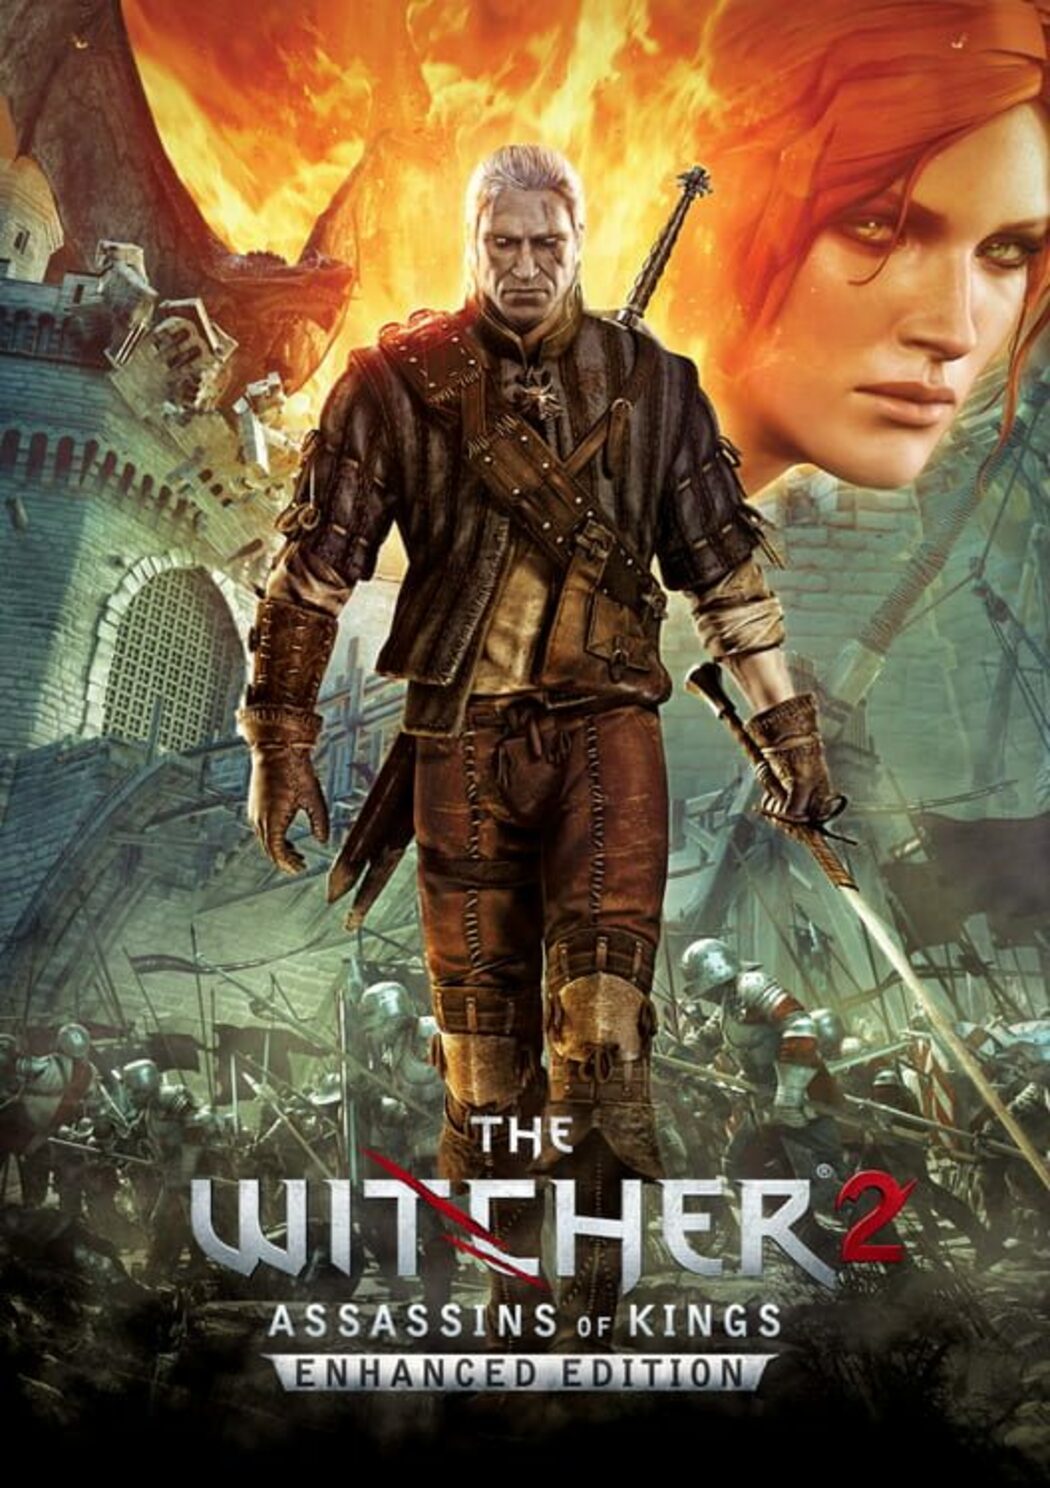 The Witcher 1, 2: Assasins of Kings, 3: Wild Hunt White Wolf Geralt of  Rivia Game CD Project Red